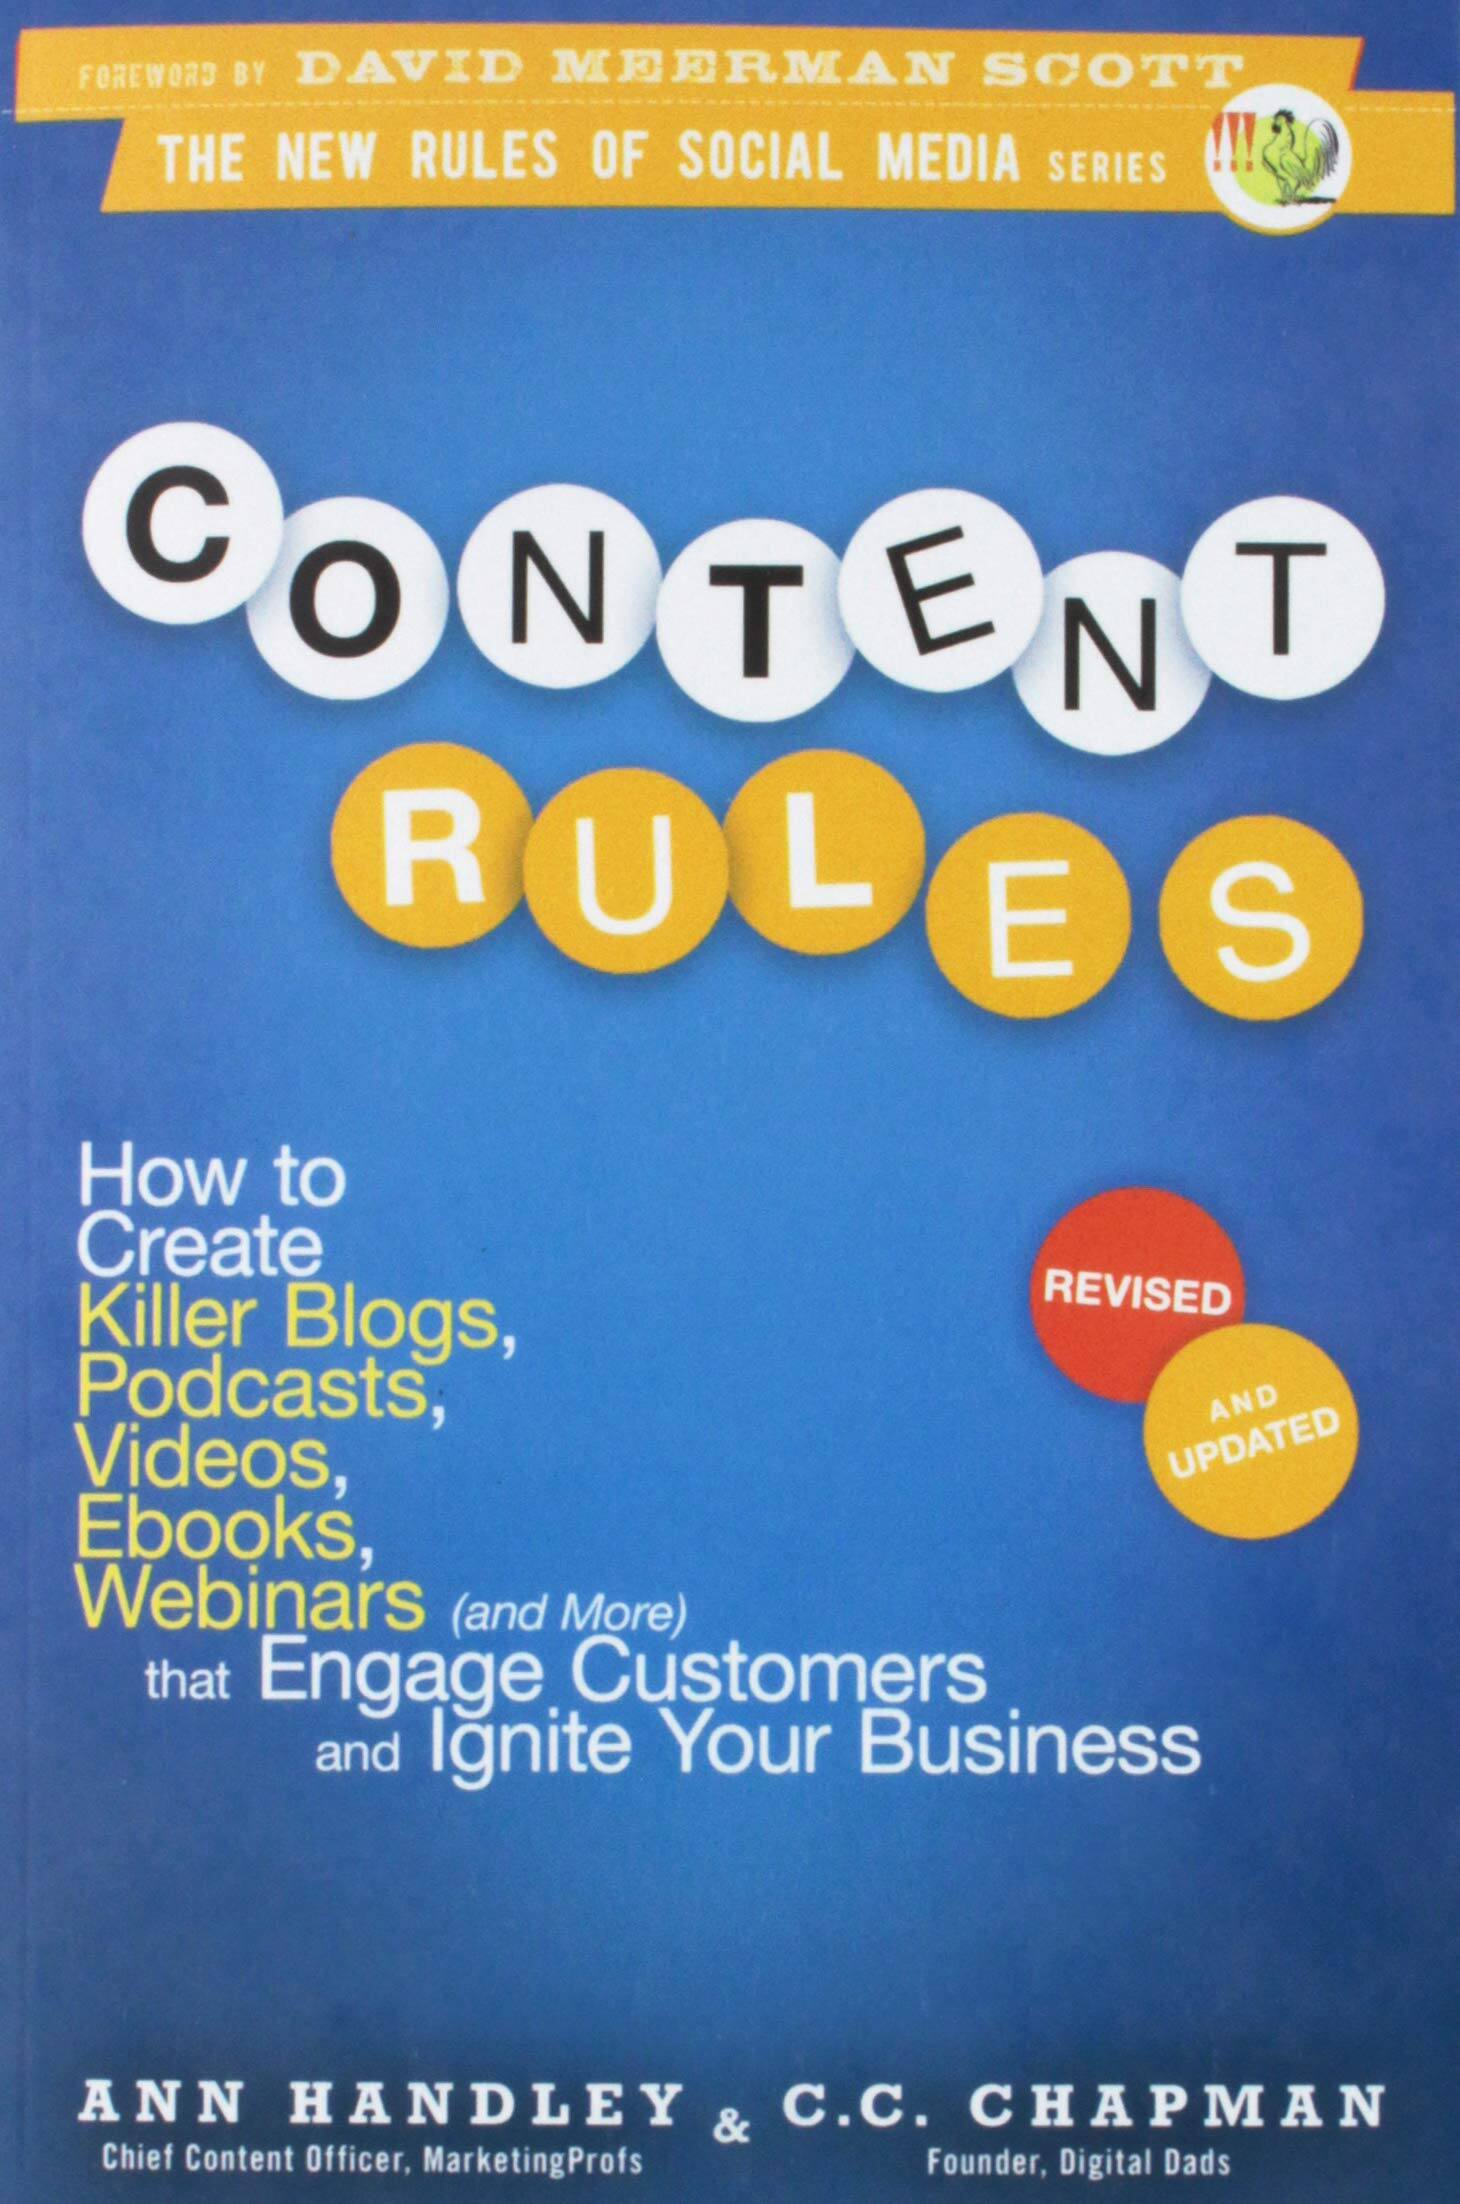 『Content Rules』  ～How to Create Killer Blogs, Podcasts, Videos, Ebooks, Webinars (and More) that Engage Customers and Ignite Your Business～